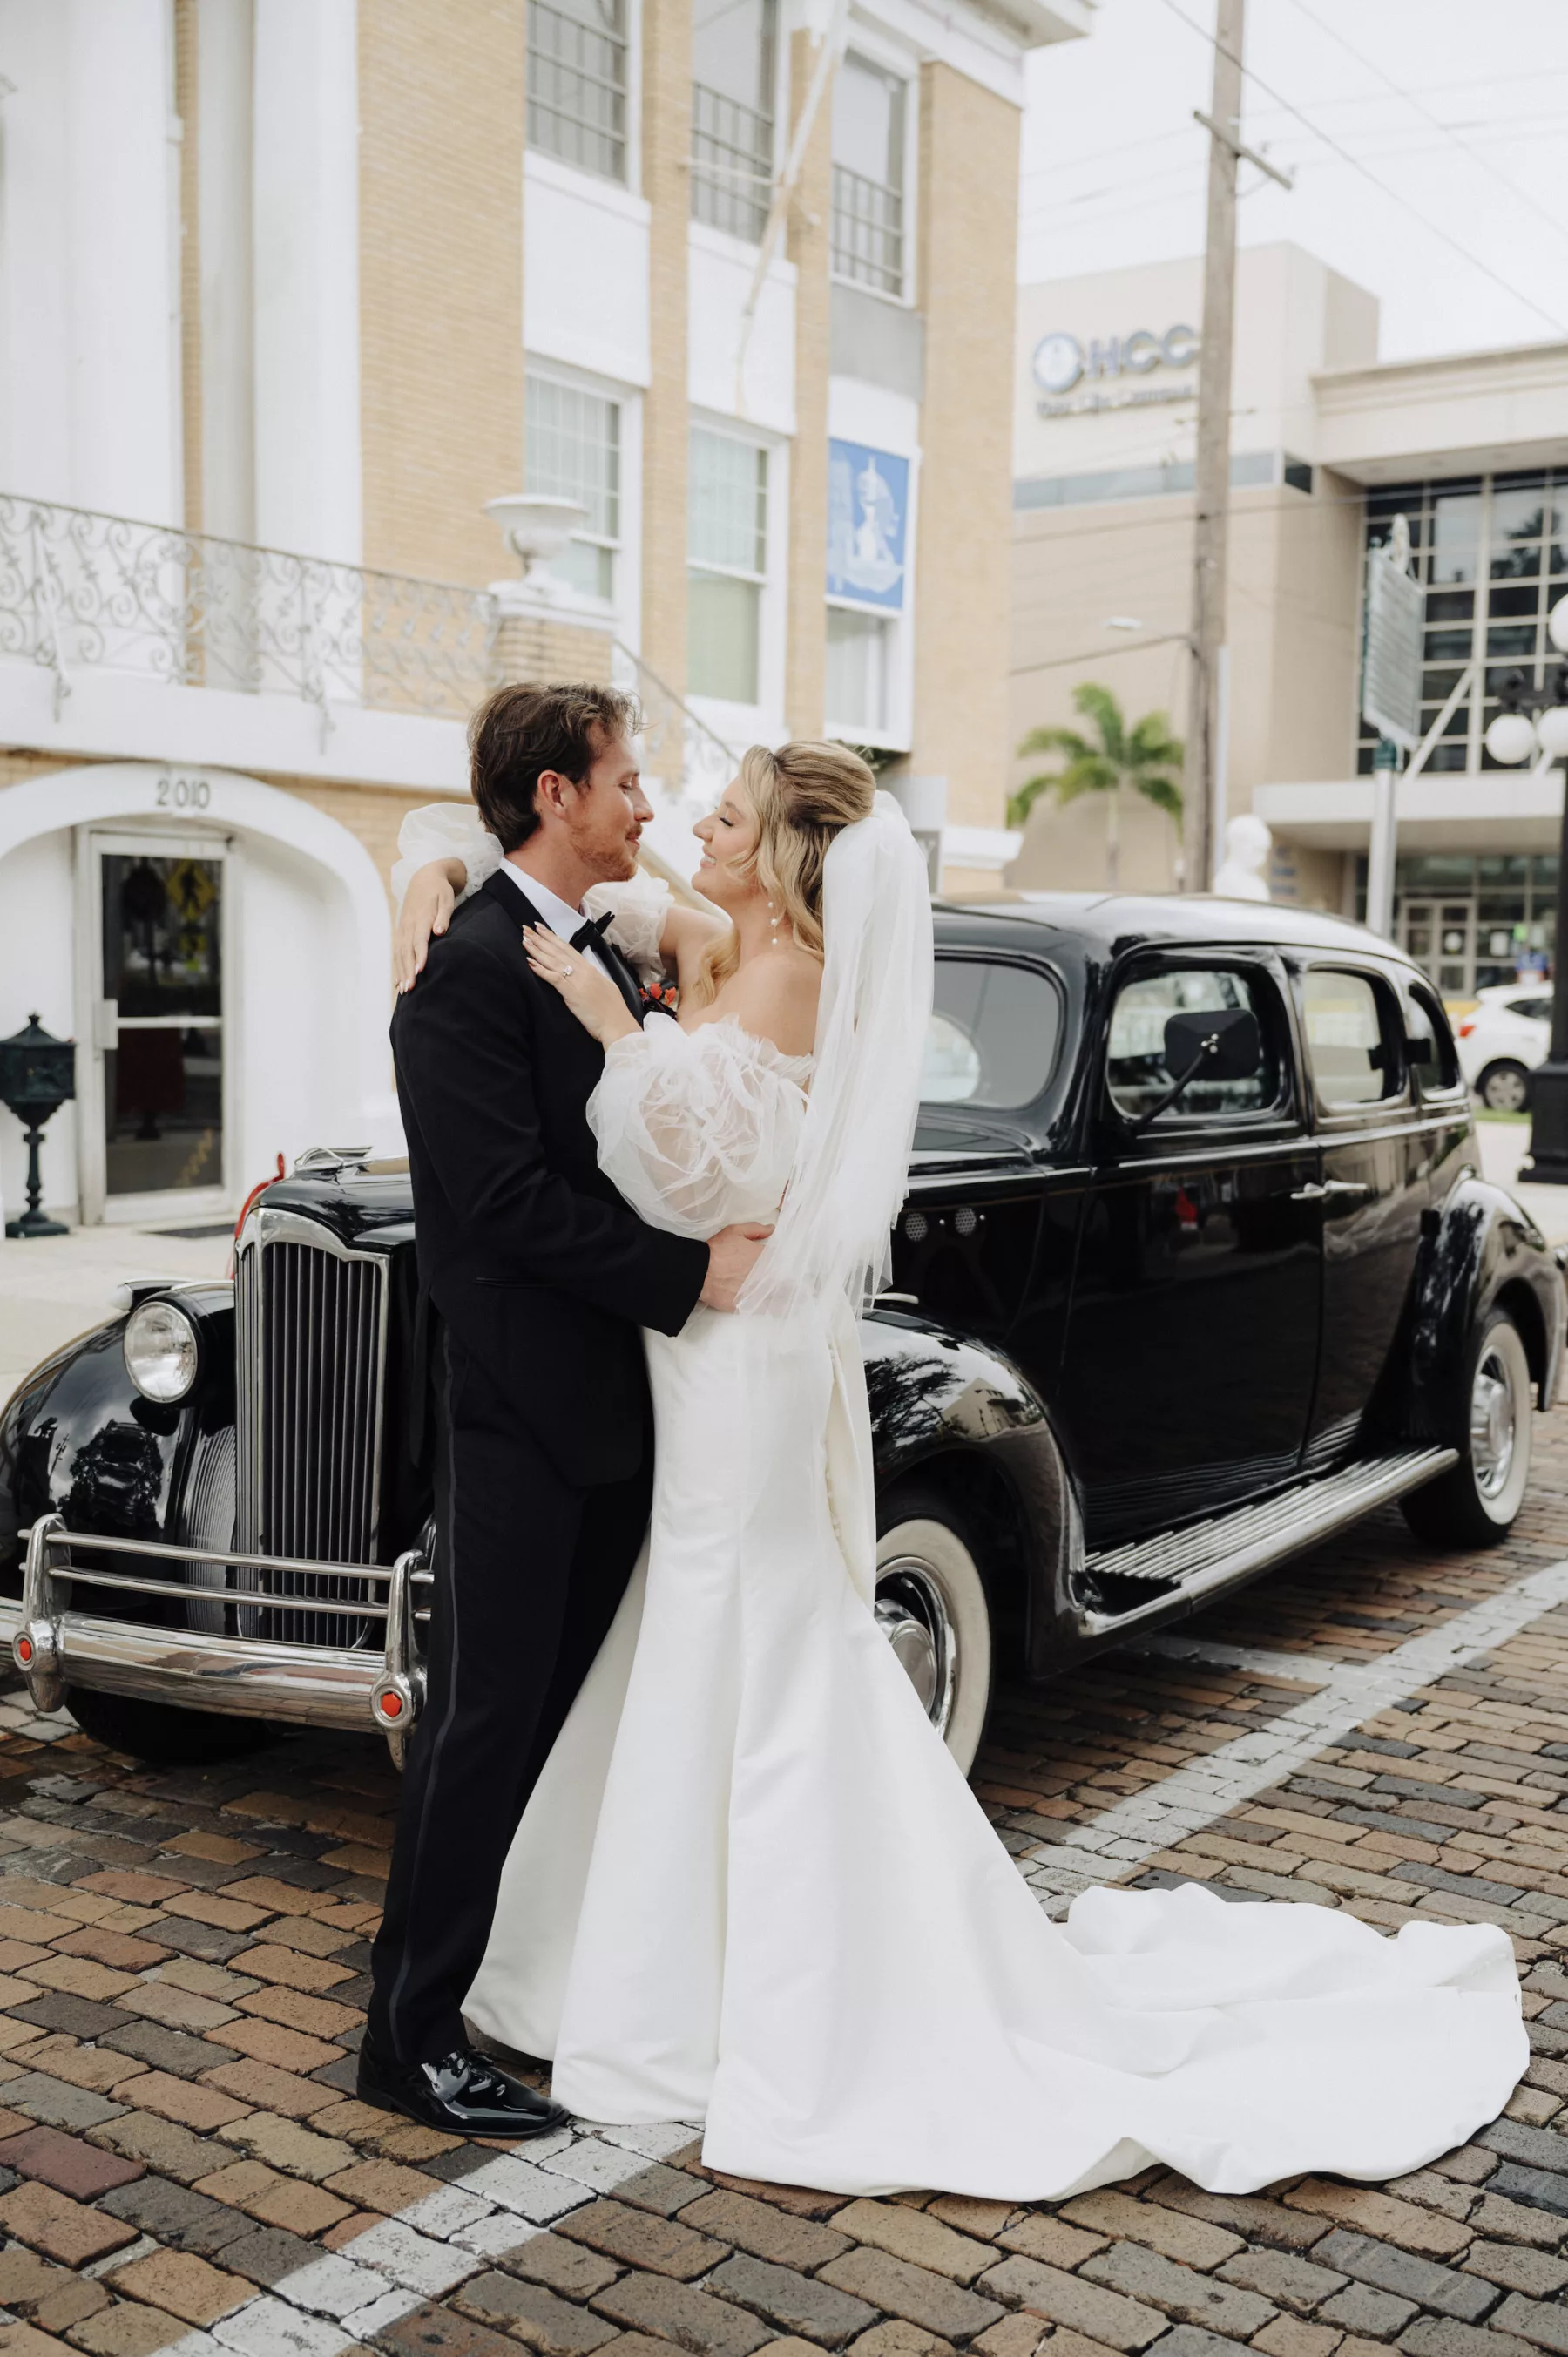 Bride and Groom with Classic Wedding Day Getaway Car Ideas | Tampa Bay Car Rental Classically Ever After | Planner EventFull Weddings | Photographer McNeile Photography